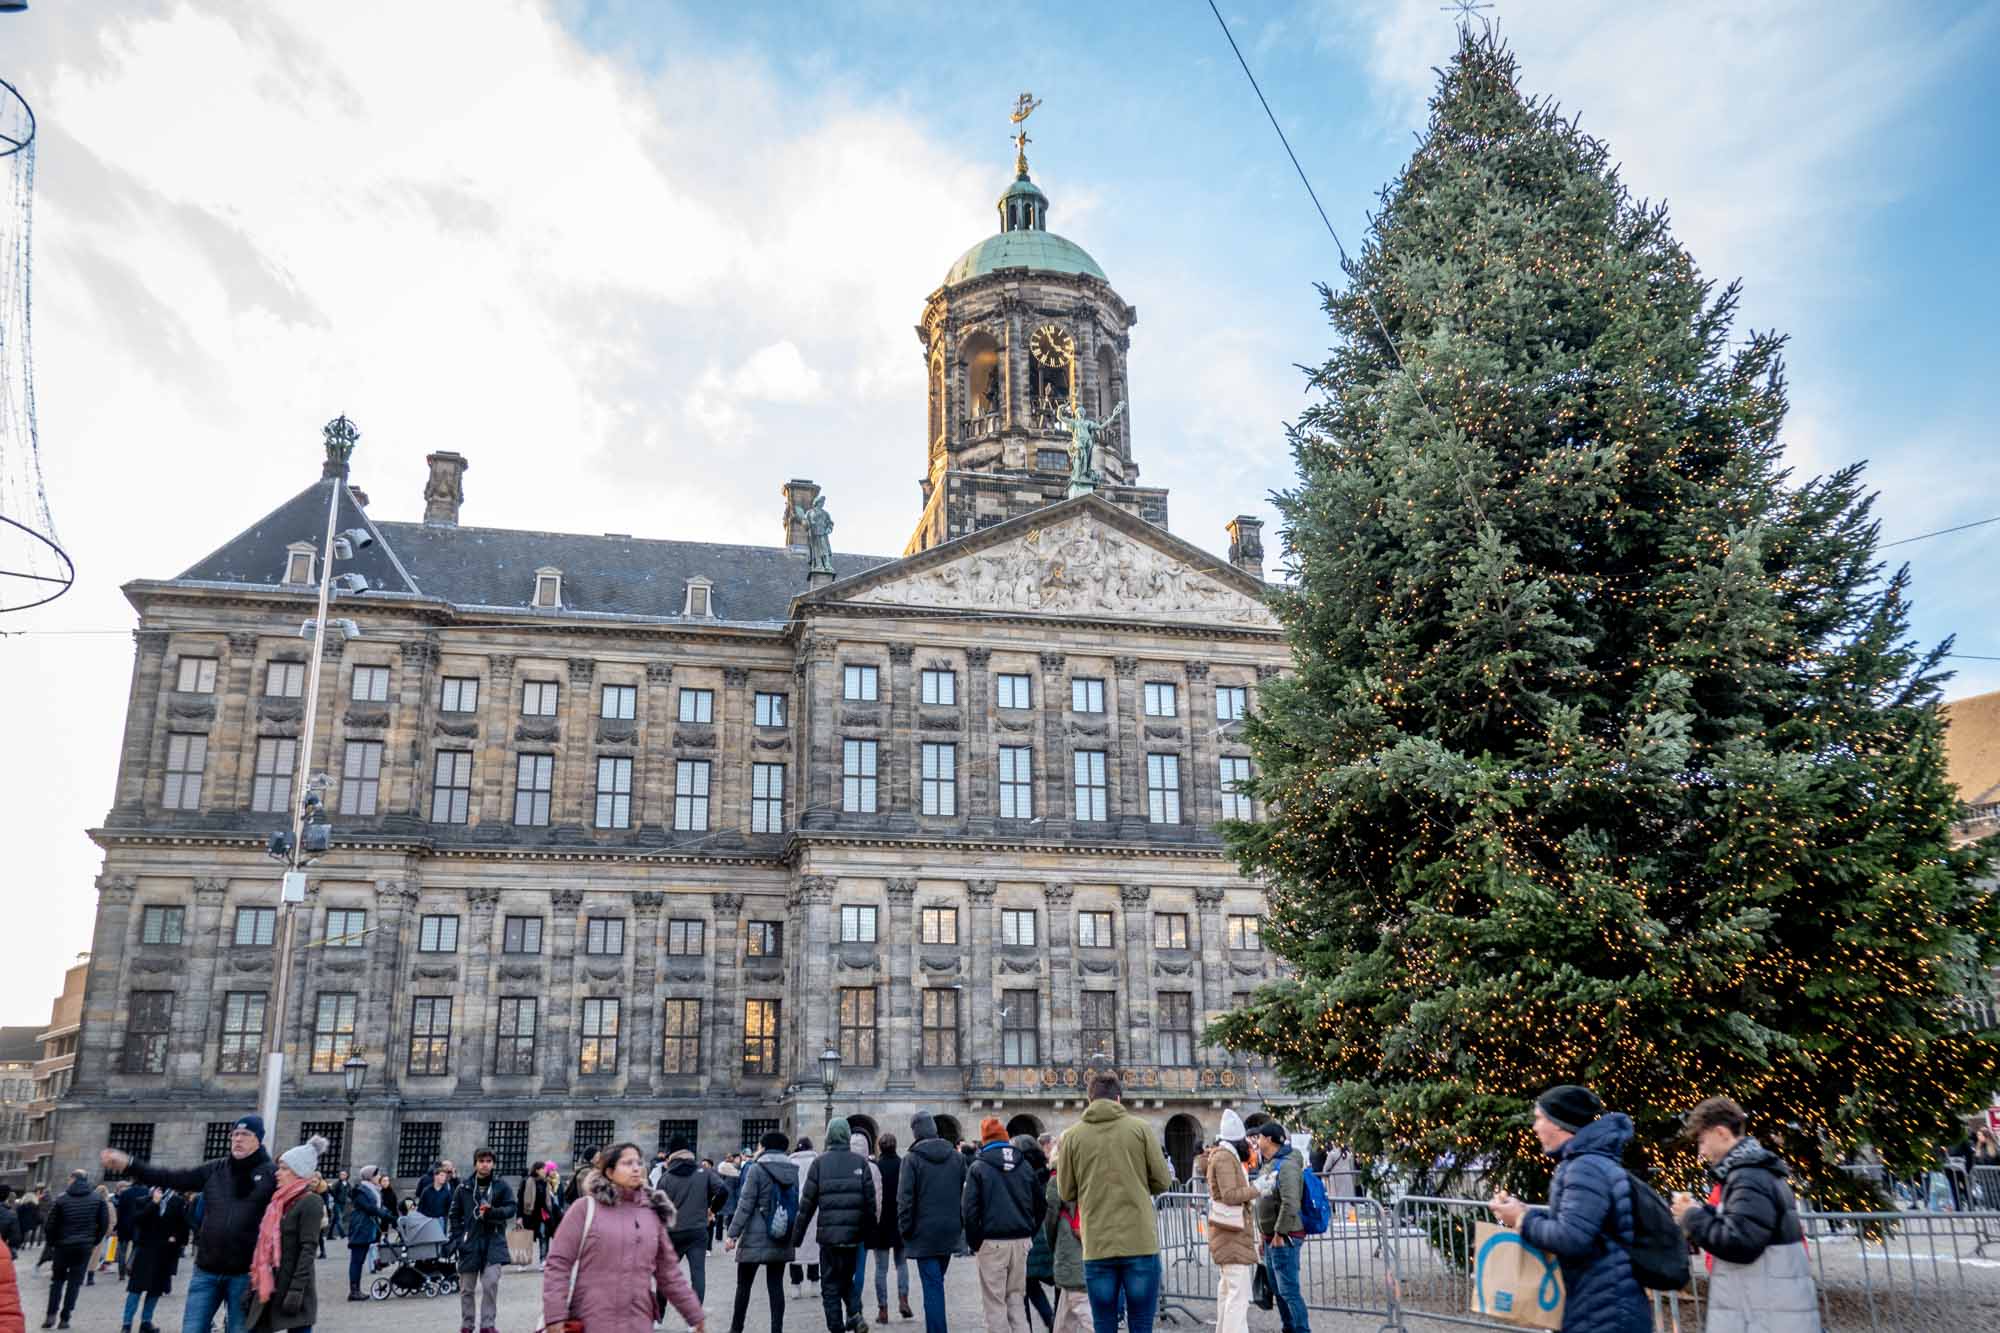 Christmas tree in a city square in front of a palace.